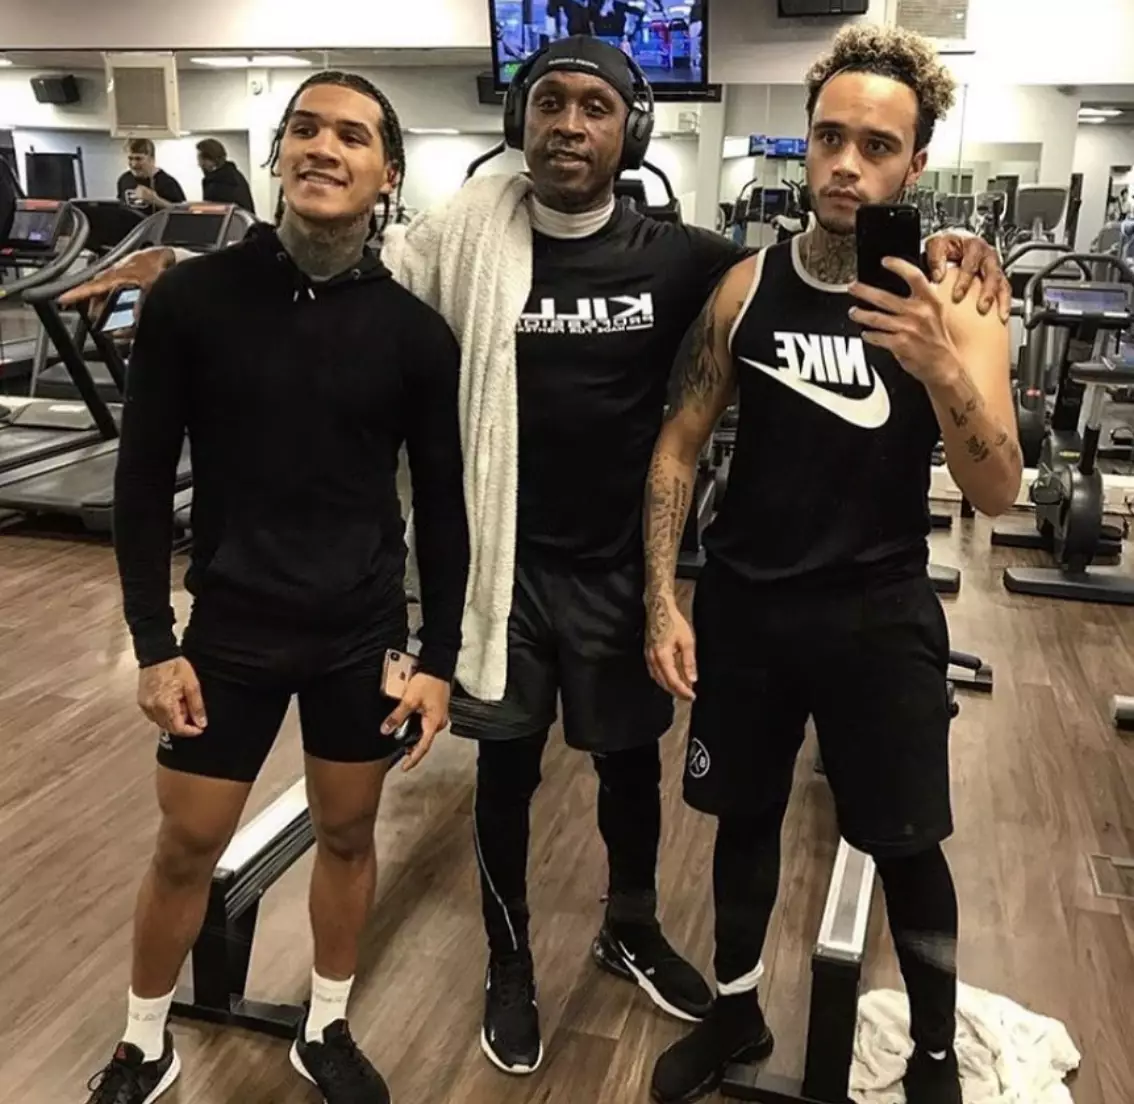 Conor Benn (left), Nigel Benn (centre) and Harley Benn (right) are all professional boxers (